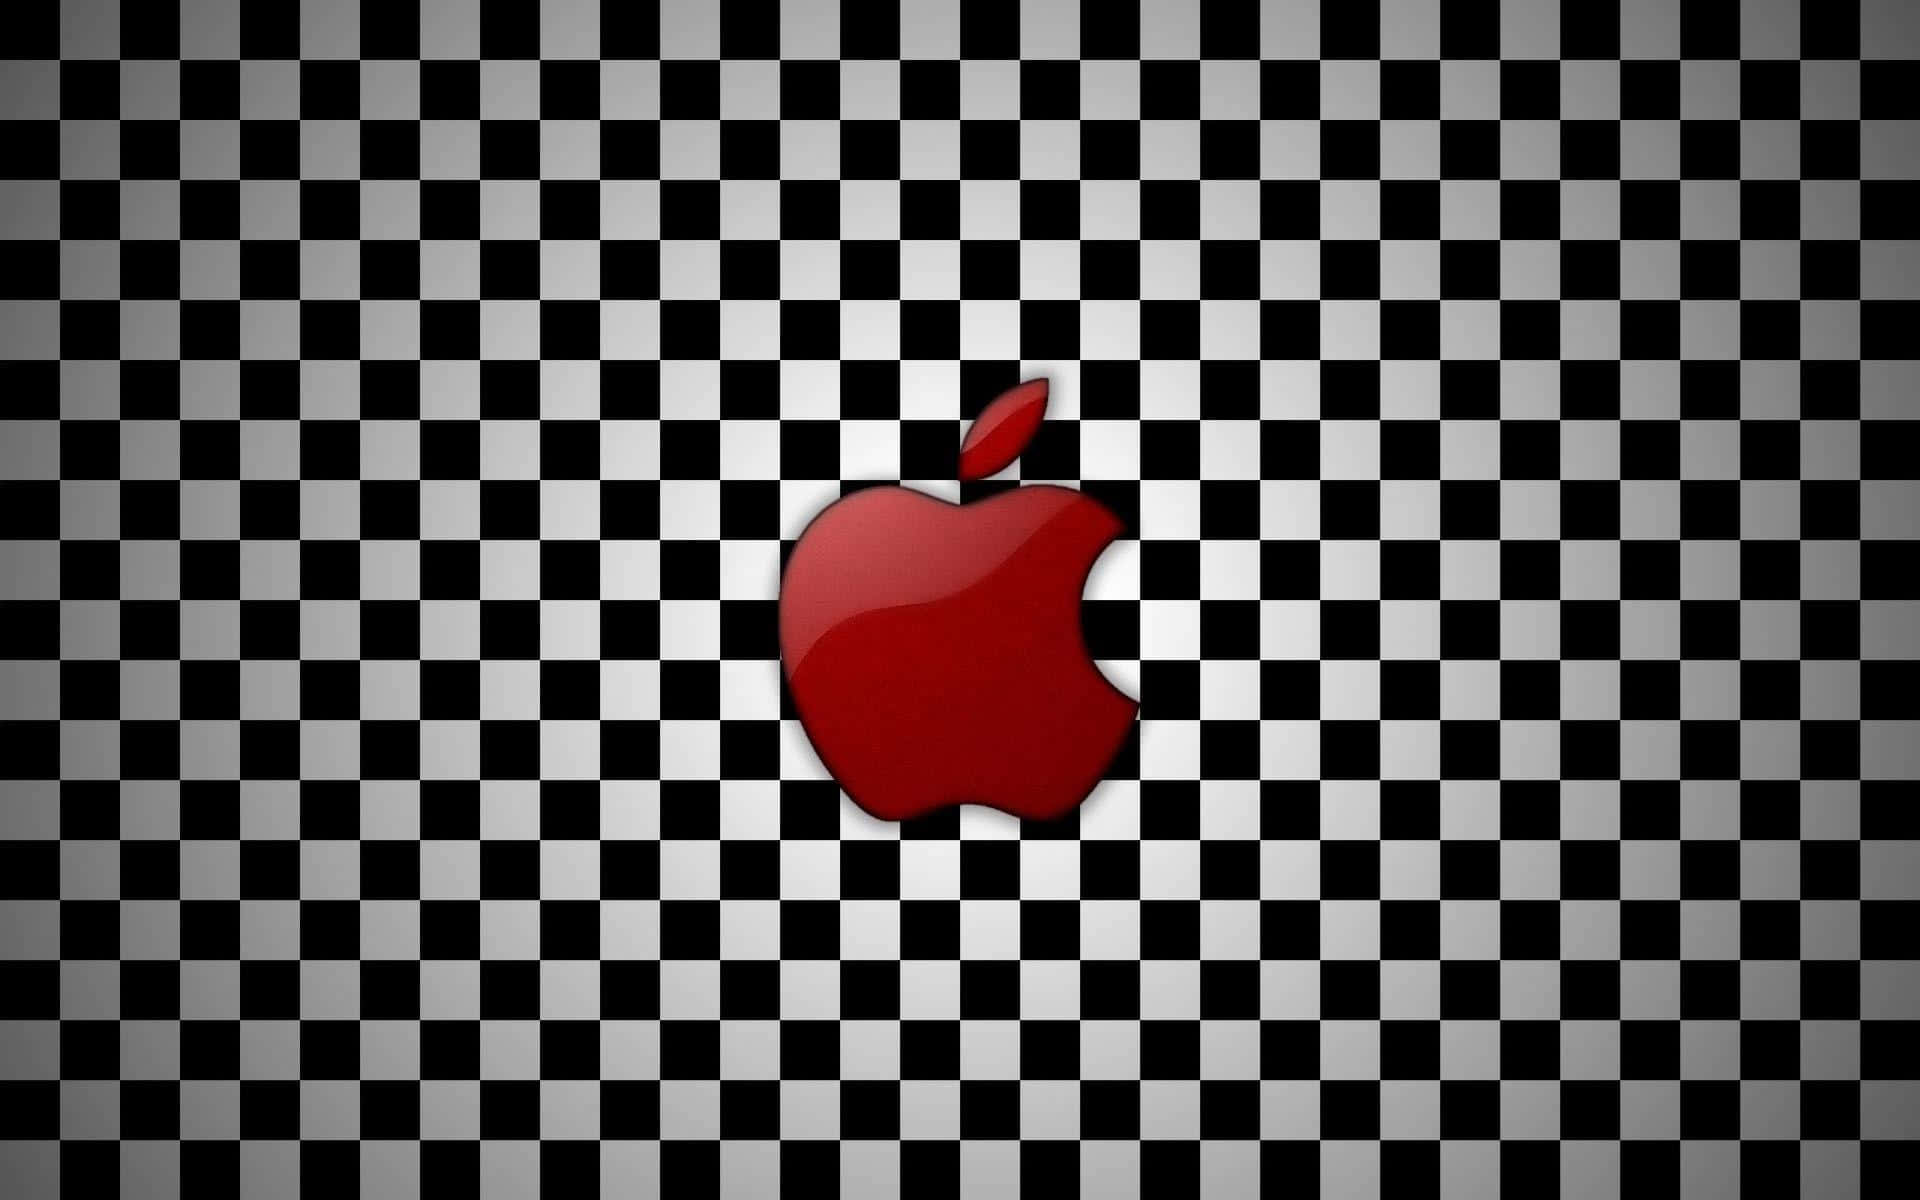 Red Apple Logoon Checkerboard Background Wallpaper